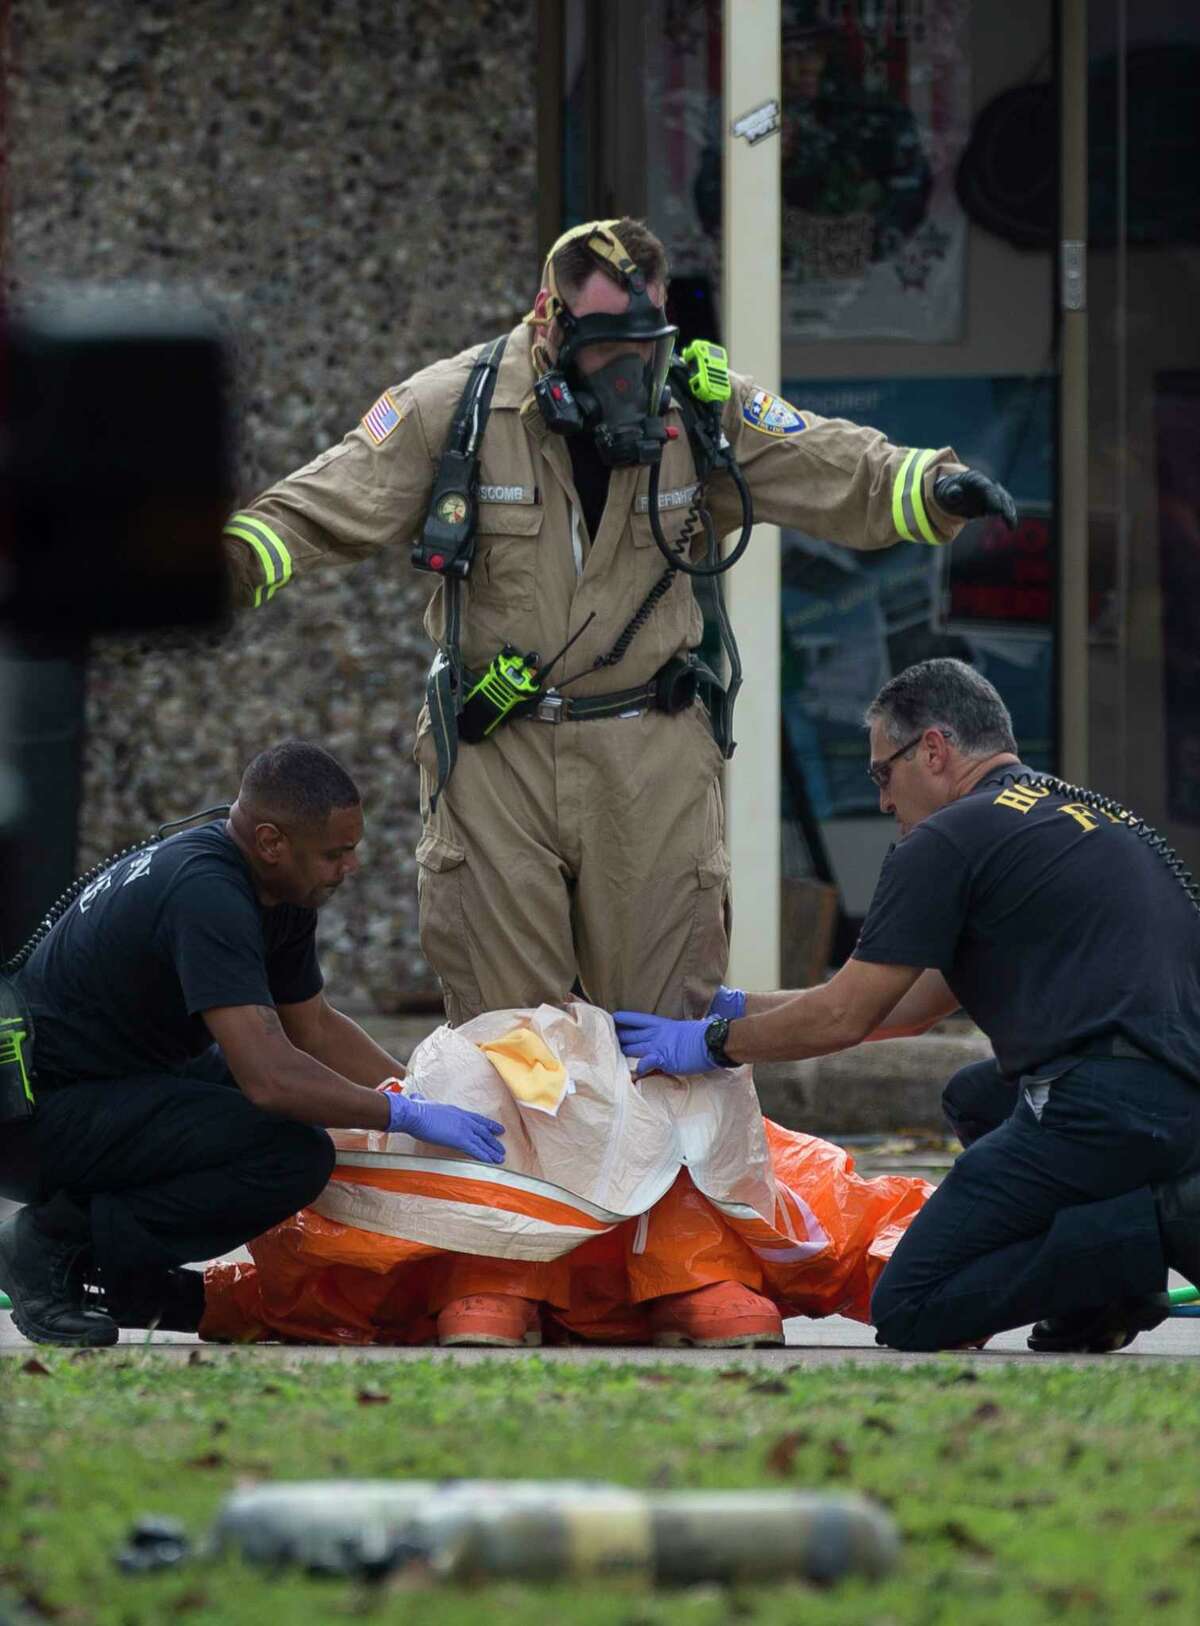 Houston Firefighters help investigators remove the hazmat suit after walked out of the building at 6100 block of West 34th Street on Thursday, Nov. 21, 2019, in Houston. Multiple agencies, including FBI, Houston Police Department, Houston Fire Department and Drug Enforcement Administration officials were working together at the scene.